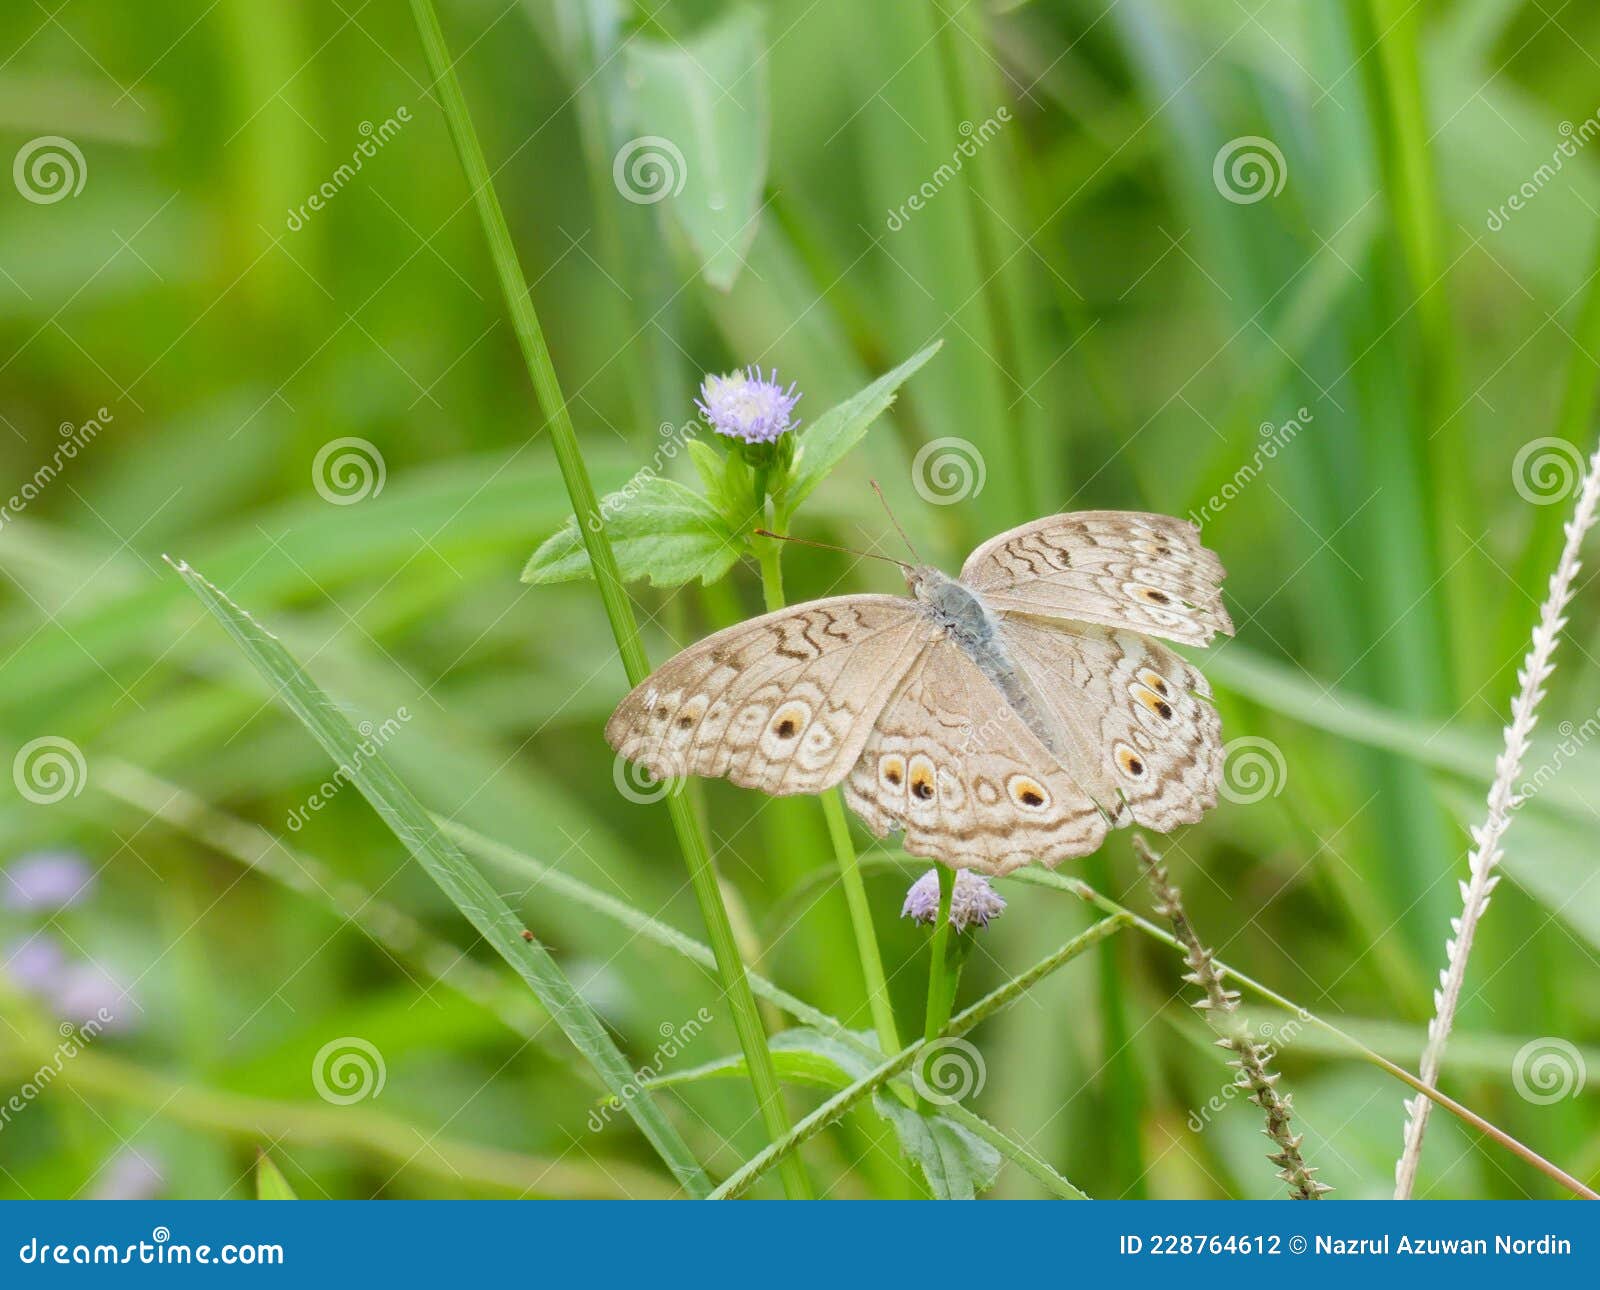 photo of satyr butterfly rest on the leave